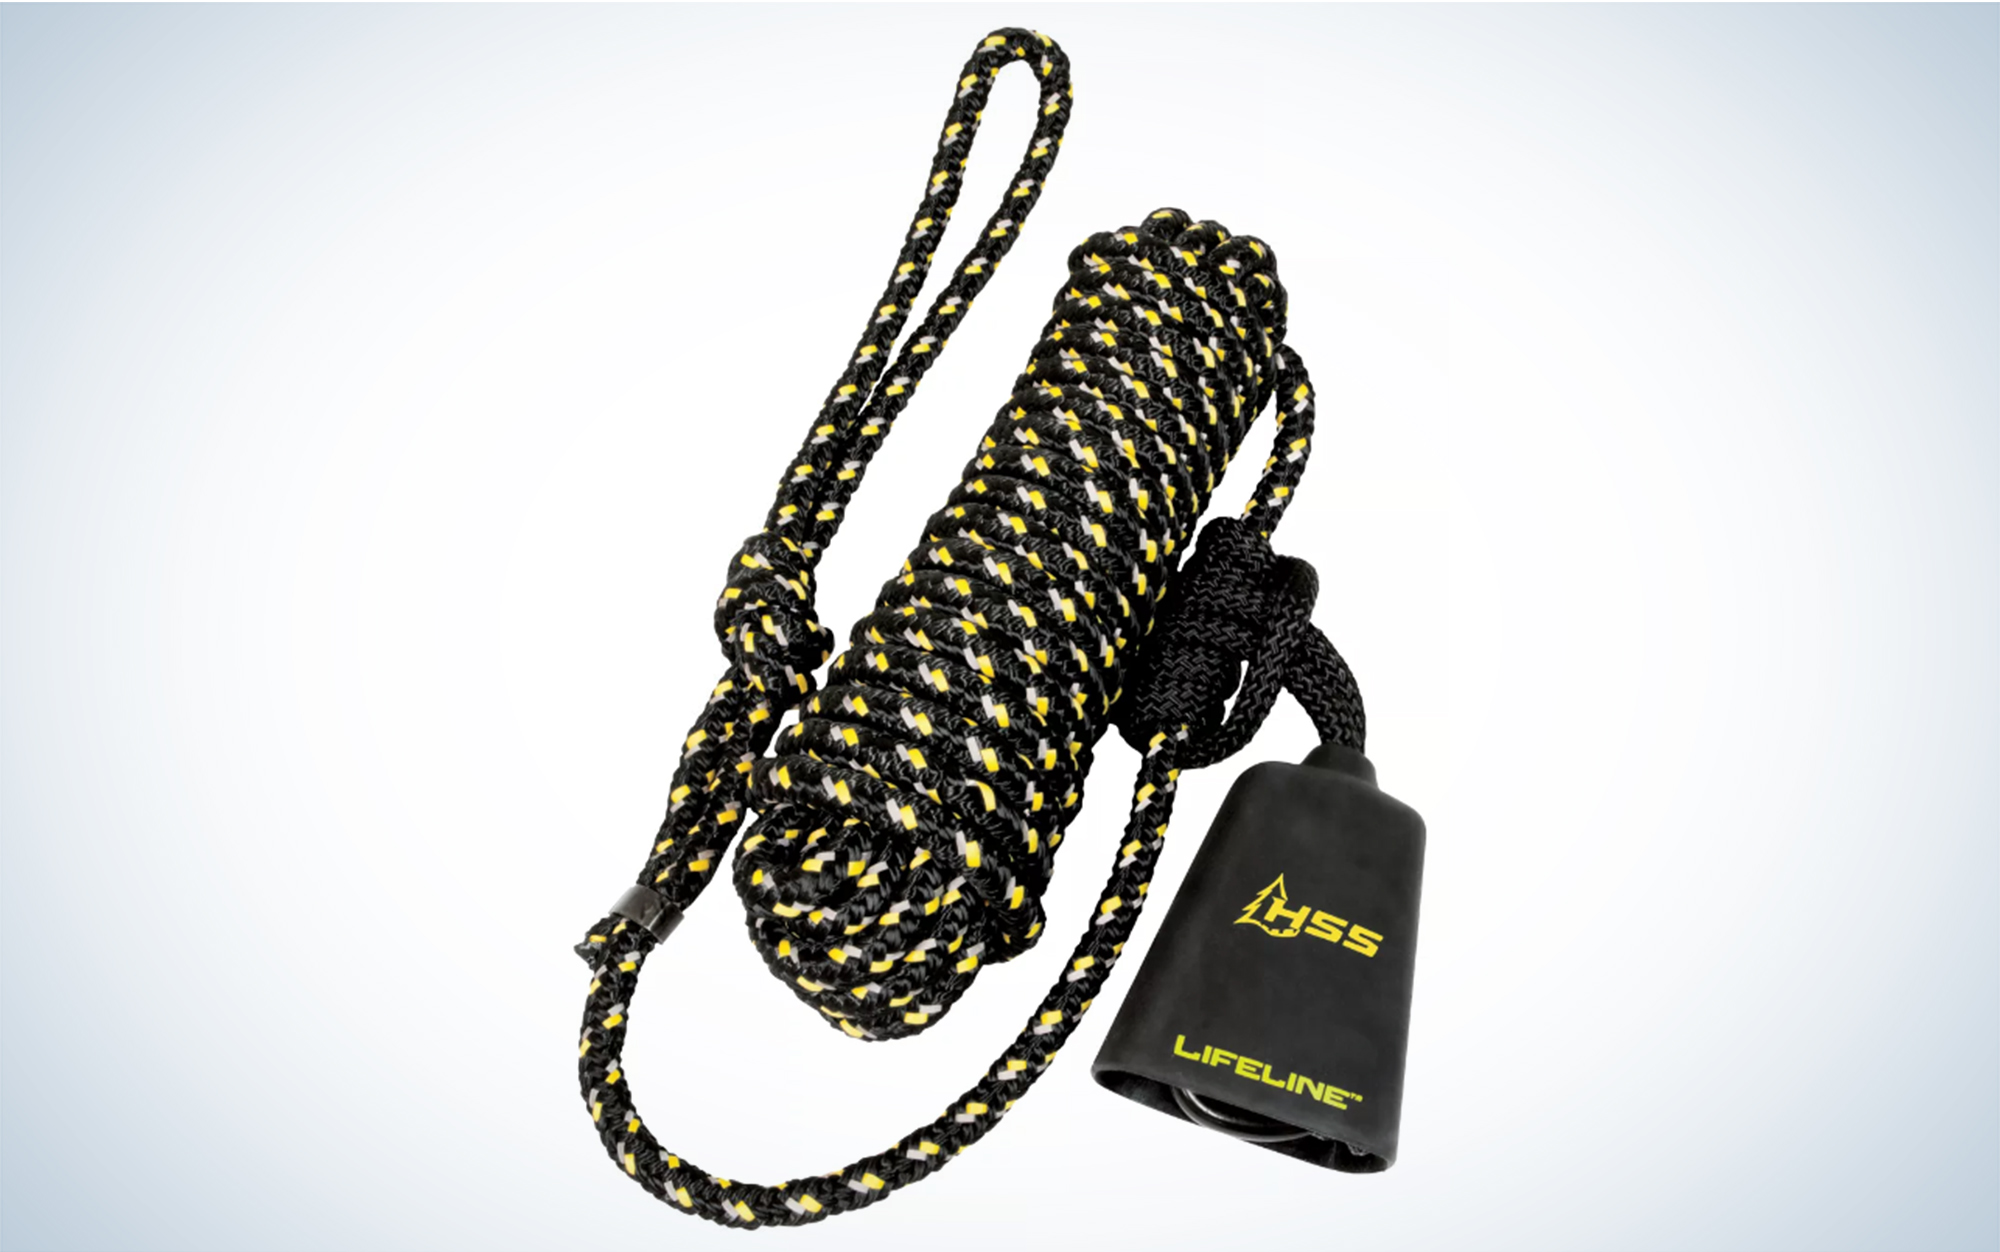 The Hunter Safety System Treestand Lifeline is the most popular lifeline.